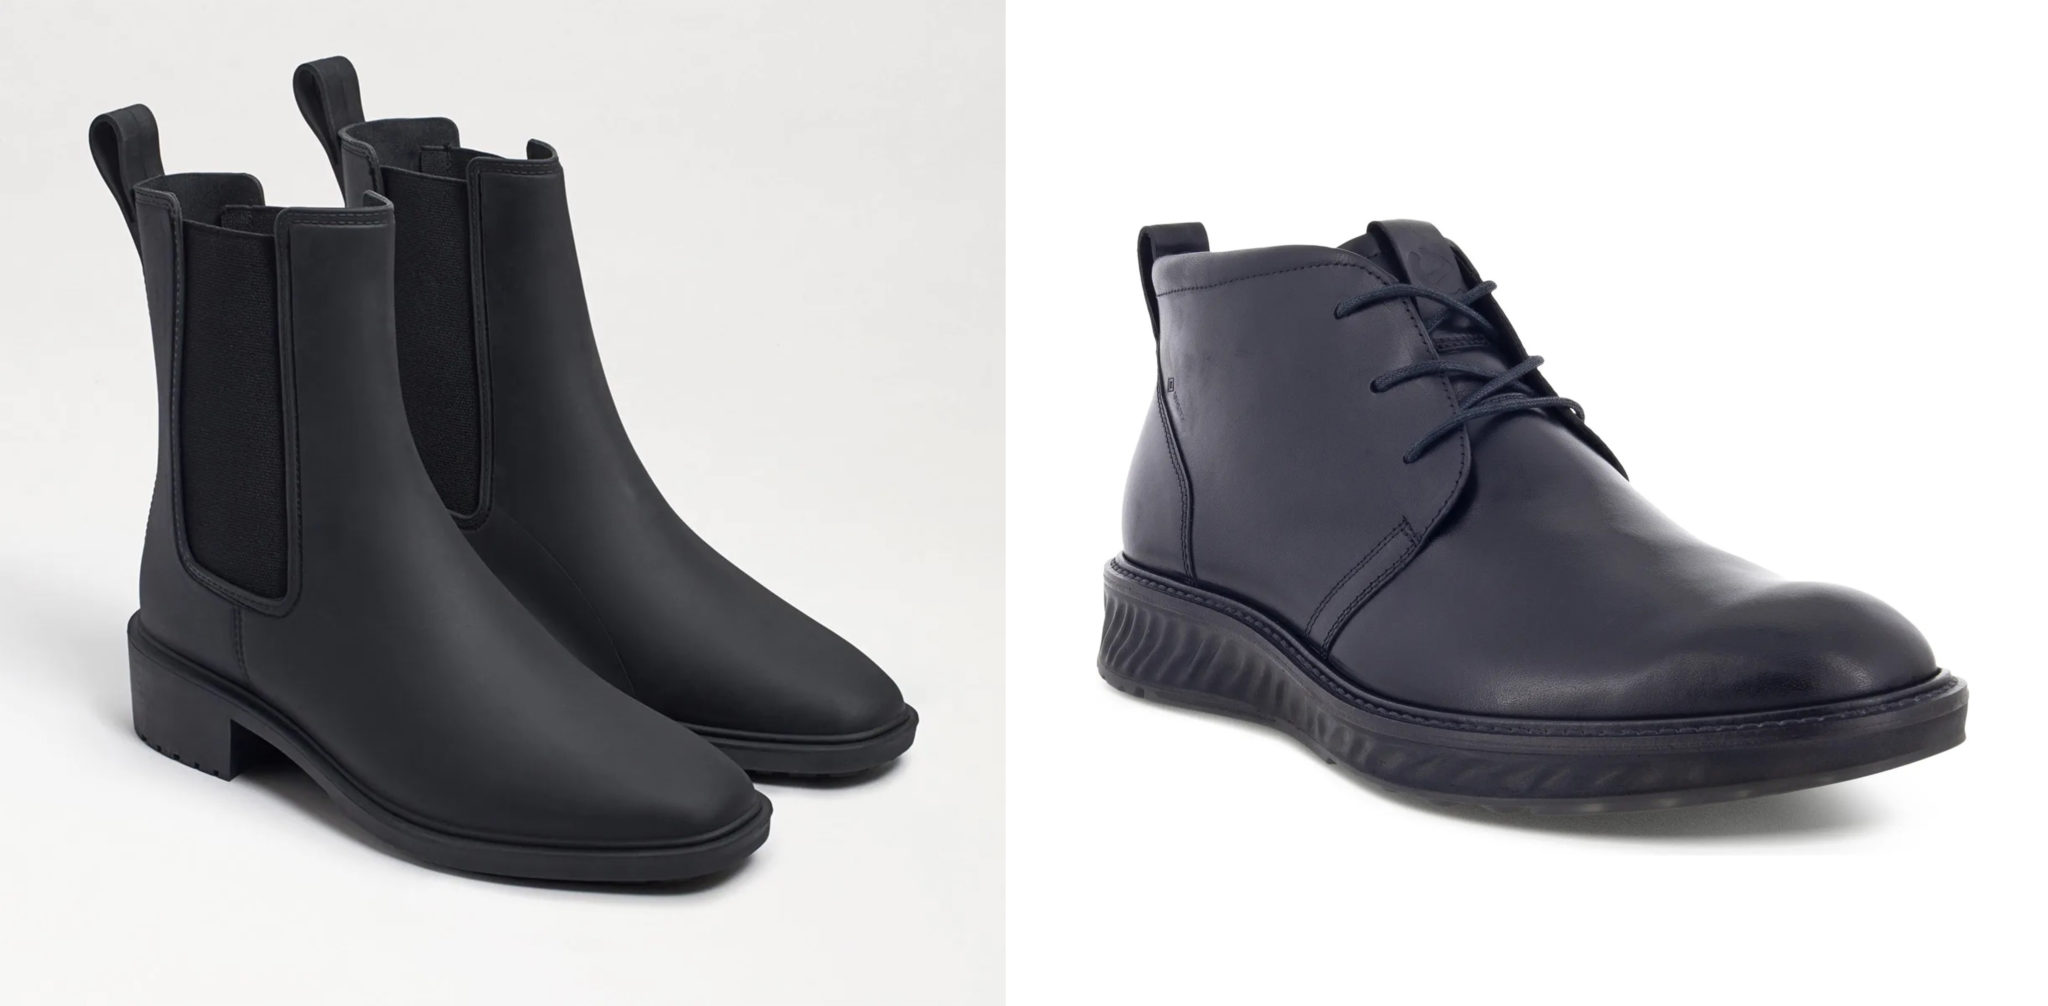 22 Amazing Waterproof Shoes To Keep Your Feet Dry